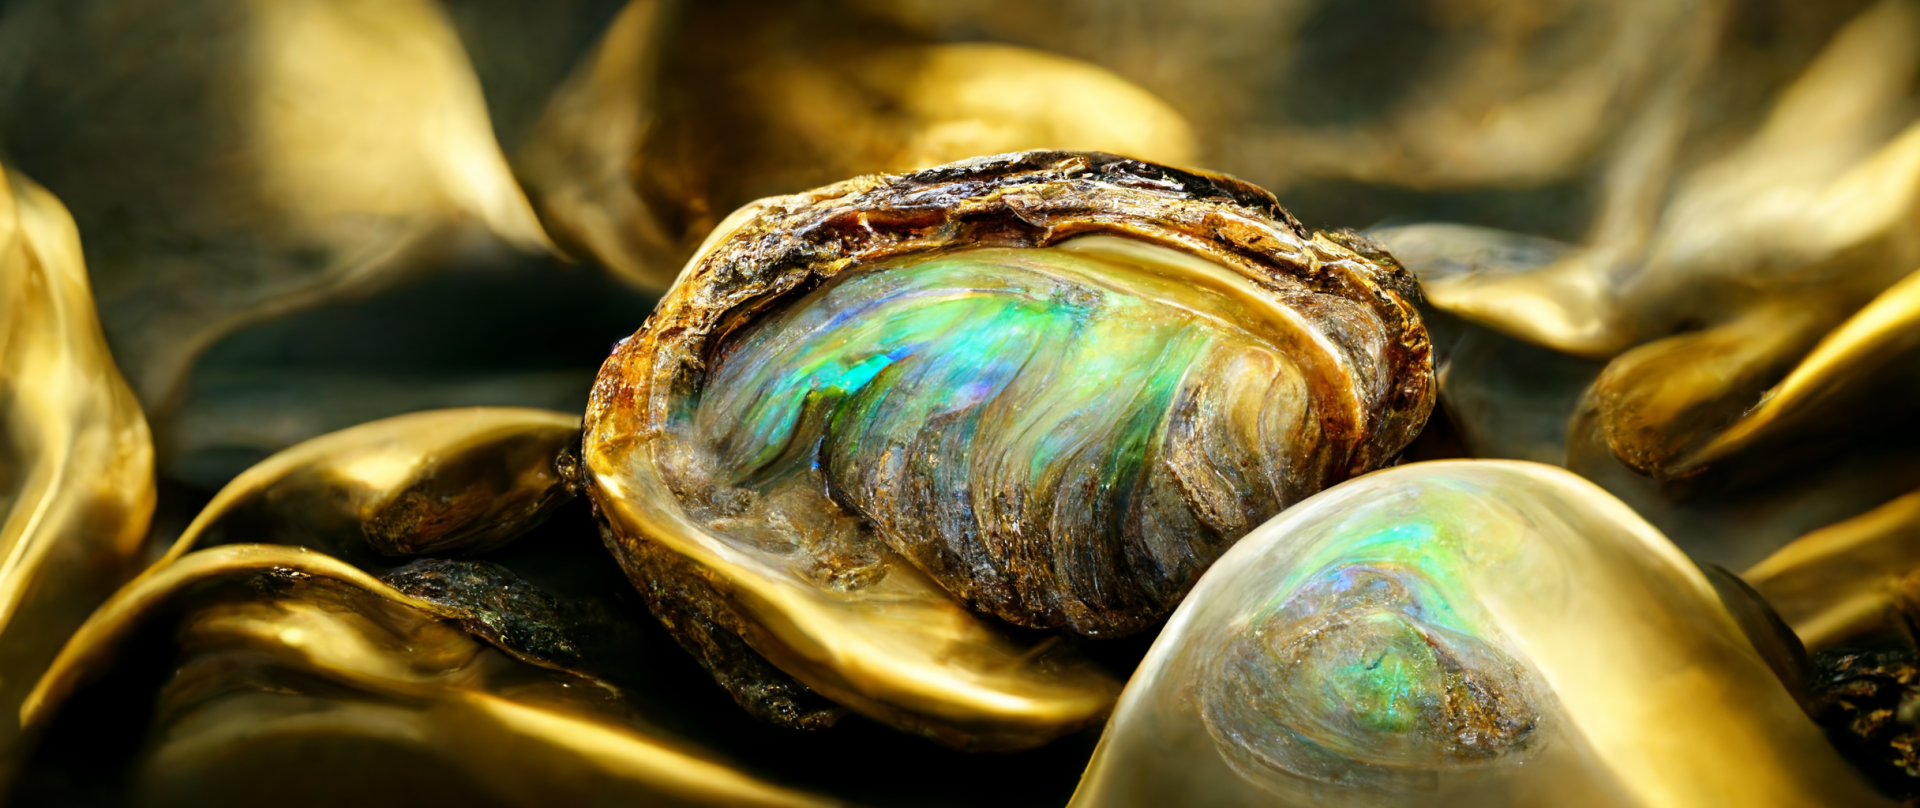 612afcff-d659-451d-91bc-58f301d36aef_S3RAPH_king_wealth_and_gold_abalone_shell_of_great_beauty_epic_composition._matte._4k_--w_1920_--h_816.png